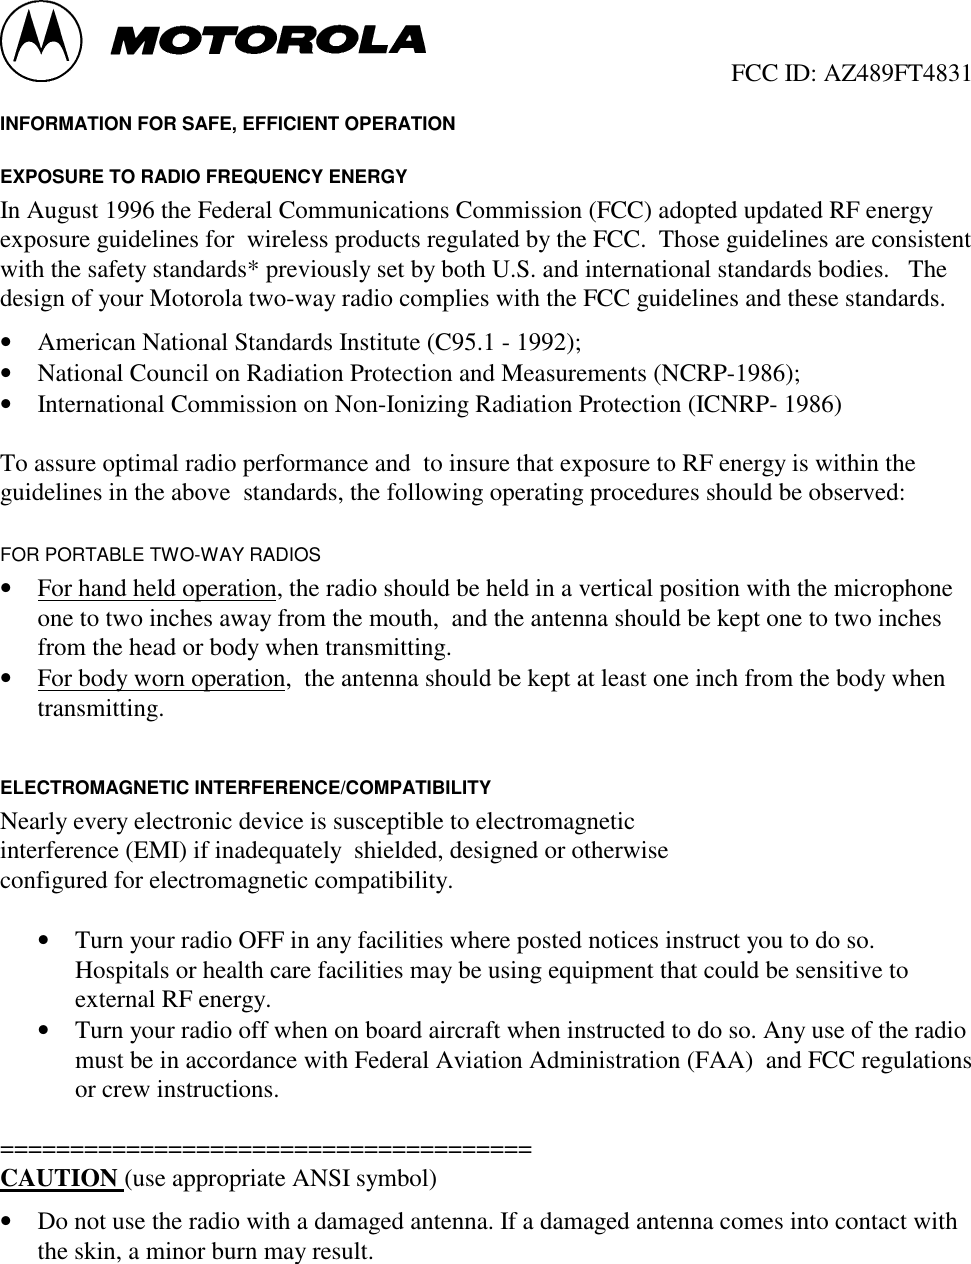                                                  FCC ID: AZ489FT4831 INFORMATION FOR SAFE, EFFICIENT OPERATION EXPOSURE TO RADIO FREQUENCY ENERGY In August 1996 the Federal Communications Commission (FCC) adopted updated RF energyexposure guidelines for  wireless products regulated by the FCC.  Those guidelines are consistentwith the safety standards* previously set by both U.S. and international standards bodies.   Thedesign of your Motorola two-way radio complies with the FCC guidelines and these standards.• American National Standards Institute (C95.1 - 1992);• National Council on Radiation Protection and Measurements (NCRP-1986);• International Commission on Non-Ionizing Radiation Protection (ICNRP- 1986)  To assure optimal radio performance and  to insure that exposure to RF energy is within theguidelines in the above  standards, the following operating procedures should be observed: FOR PORTABLE TWO-WAY RADIOS• For hand held operation, the radio should be held in a vertical position with the microphoneone to two inches away from the mouth,  and the antenna should be kept one to two inchesfrom the head or body when transmitting.• For body worn operation,  the antenna should be kept at least one inch from the body whentransmitting.  ELECTROMAGNETIC INTERFERENCE/COMPATIBILITY Nearly every electronic device is susceptible to electromagnetic interference (EMI) if inadequately  shielded, designed or otherwise configured for electromagnetic compatibility. • Turn your radio OFF in any facilities where posted notices instruct you to do so.Hospitals or health care facilities may be using equipment that could be sensitive toexternal RF energy.• Turn your radio off when on board aircraft when instructed to do so. Any use of the radiomust be in accordance with Federal Aviation Administration (FAA)  and FCC regulationsor crew instructions.  ====================================== CAUTION (use appropriate ANSI symbol)• Do not use the radio with a damaged antenna. If a damaged antenna comes into contact withthe skin, a minor burn may result.